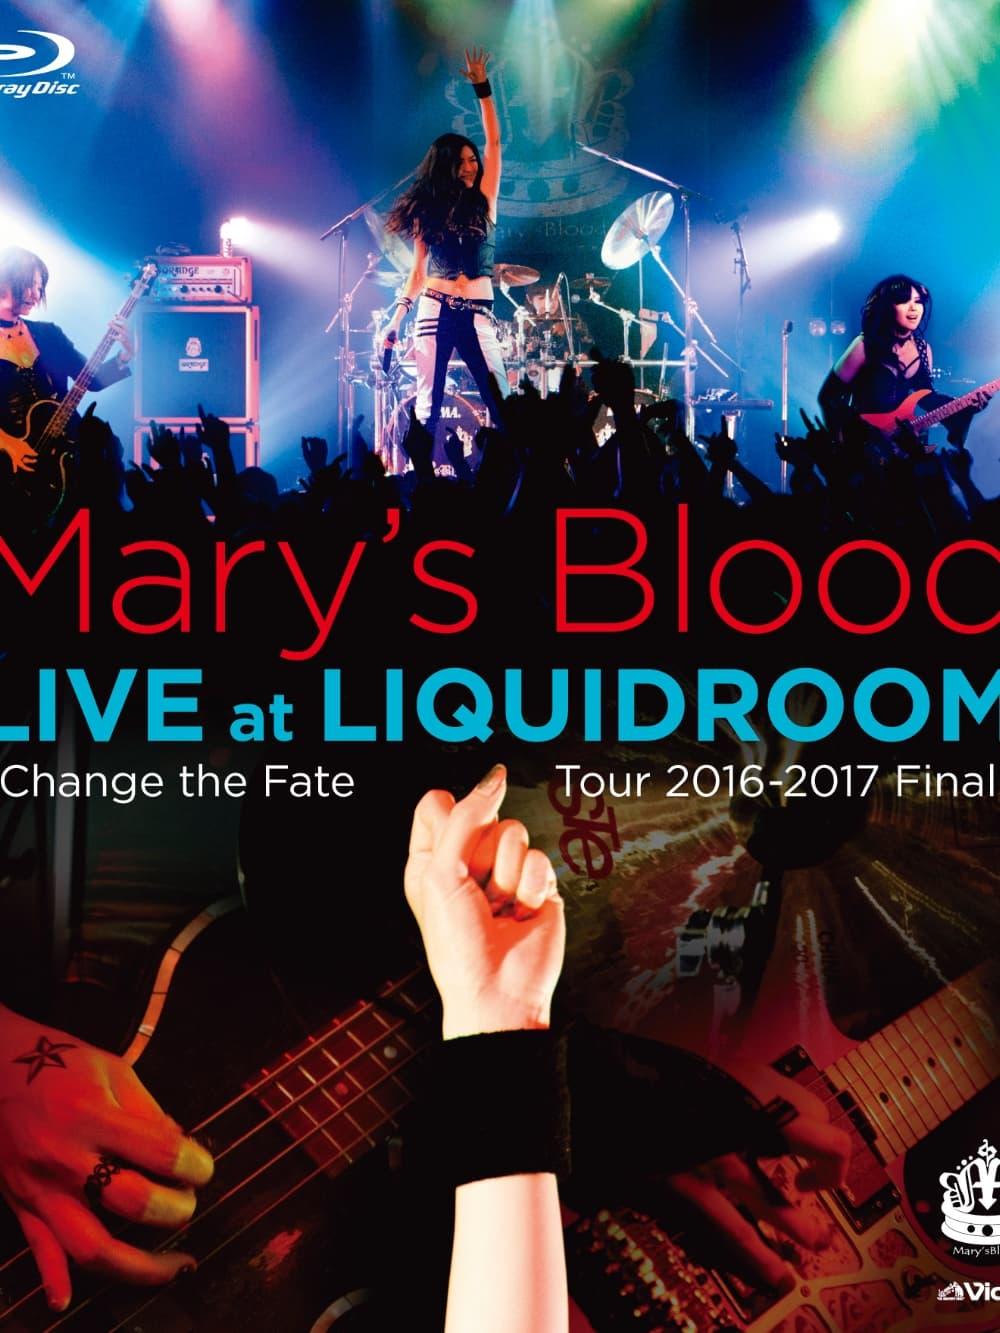 Mary's Blood LIVE at LIQUIDROOM ~Change the Fate Tour 2016-2017 Final~ poster